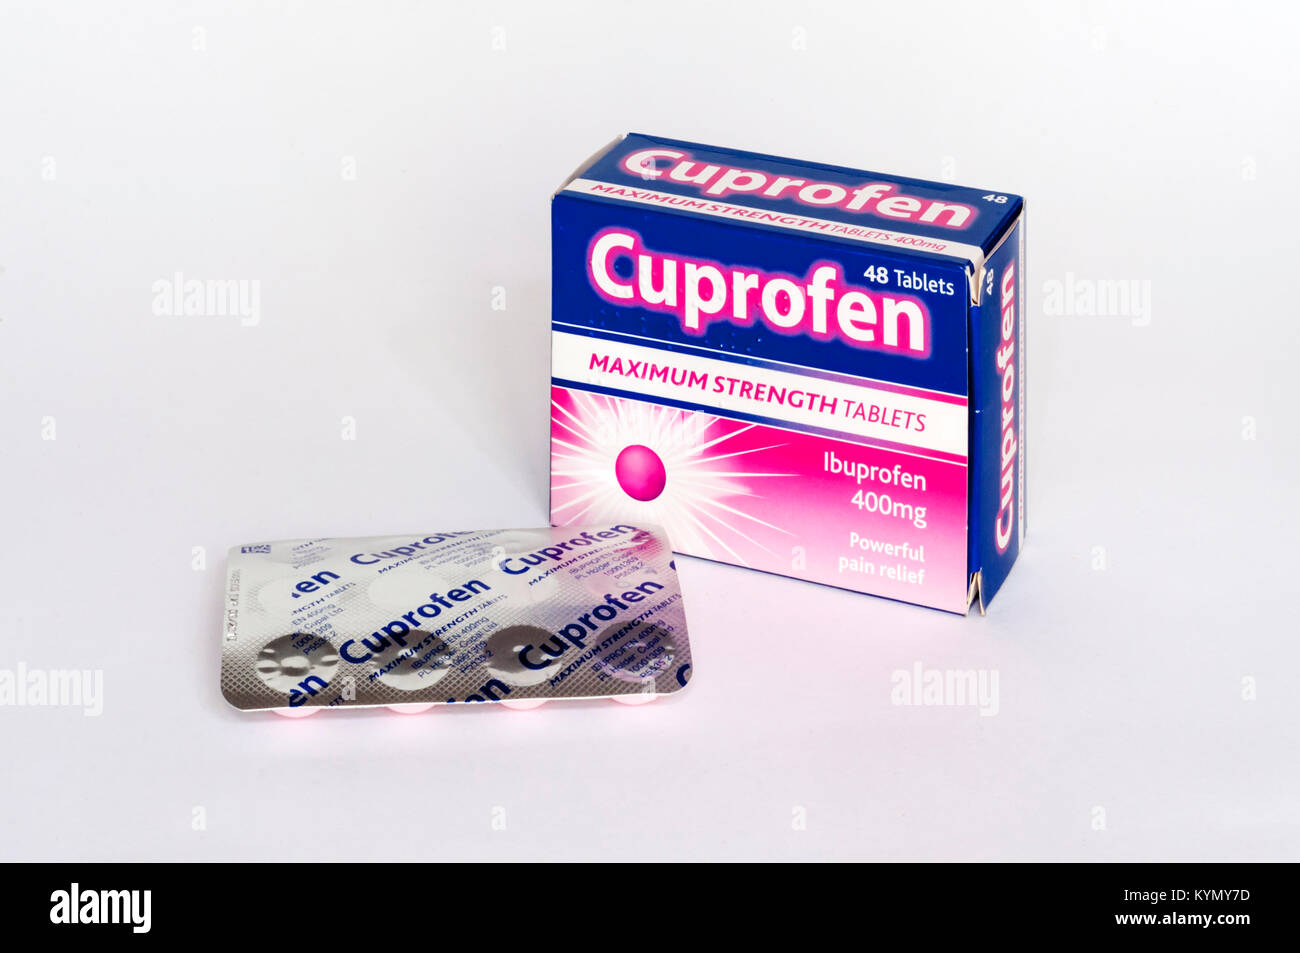 Box & blister pack of Cuprofen tablets containing the anti-inflammatory painkiller ibuprofen Stock Photo